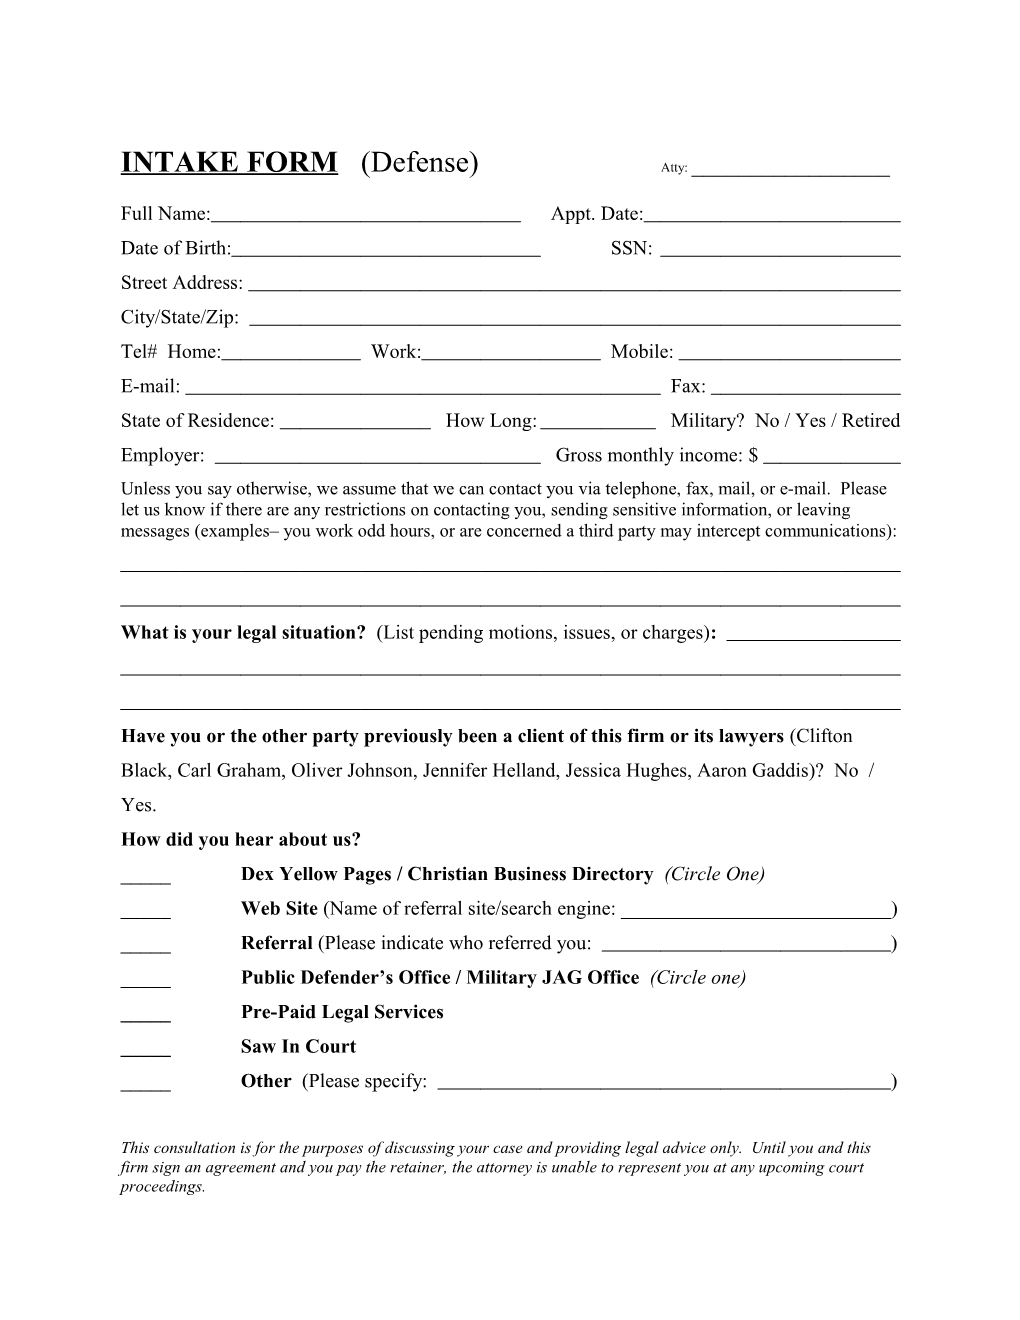 Intake Form Domestic Relations